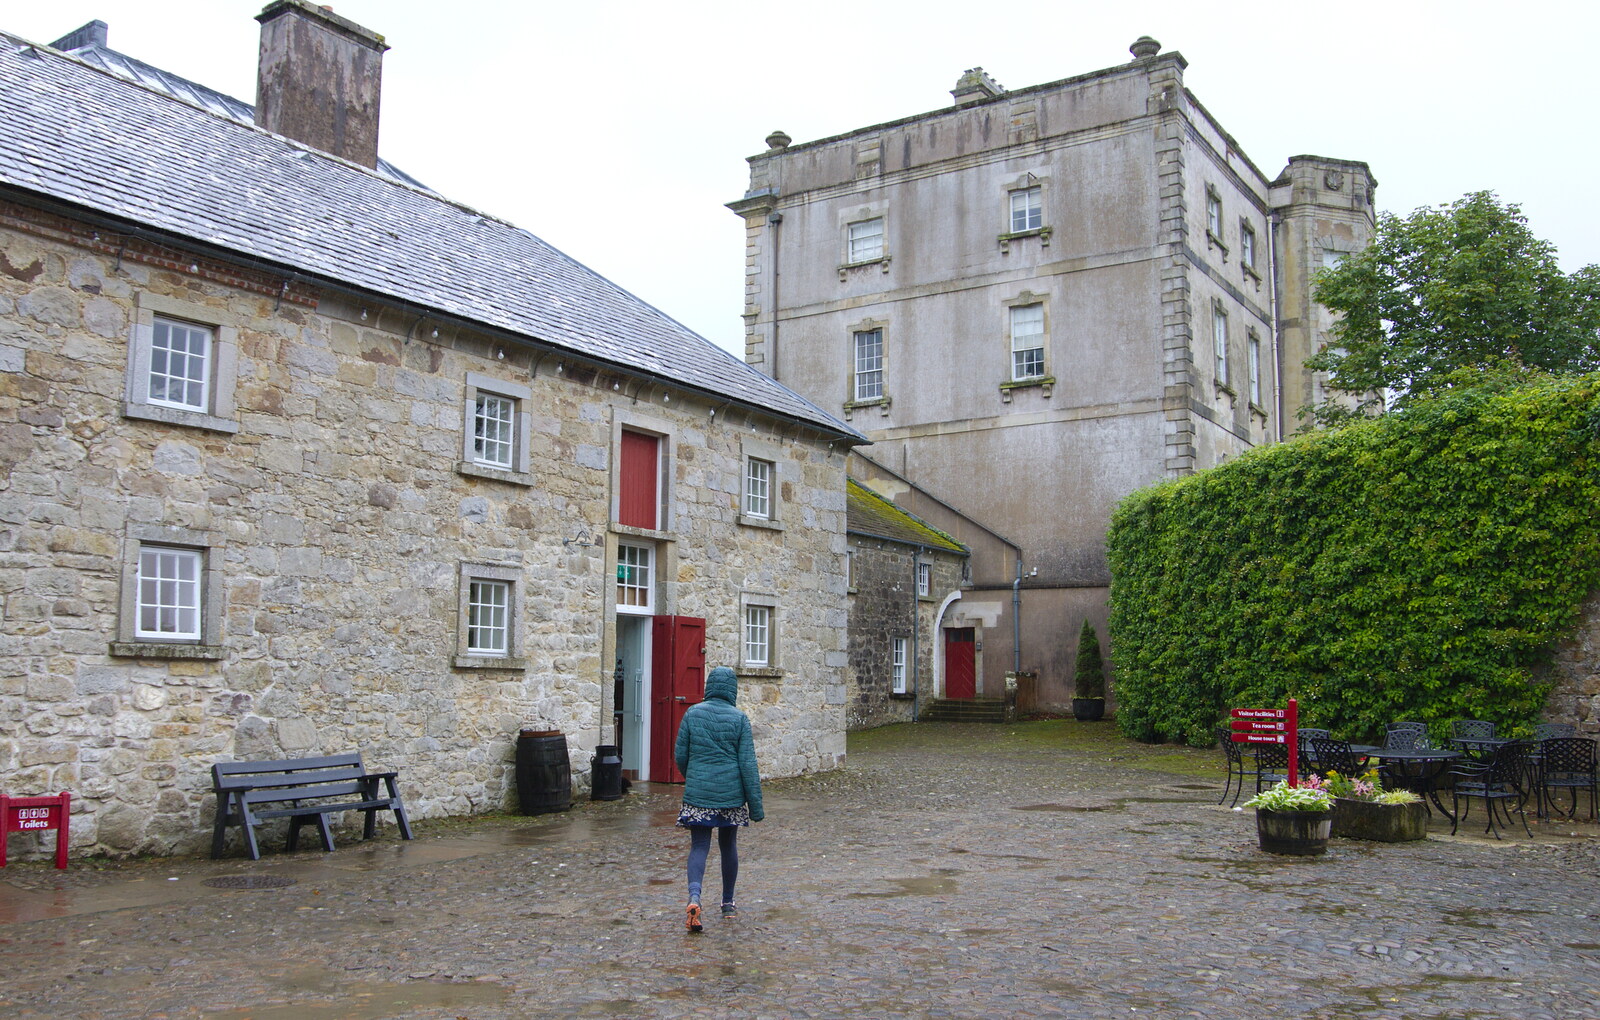 Isobel roams around the courtyard from Florence Court and a Postcard from Sligo, Fermanagh and Sligo, Ireland - 21st August 2019